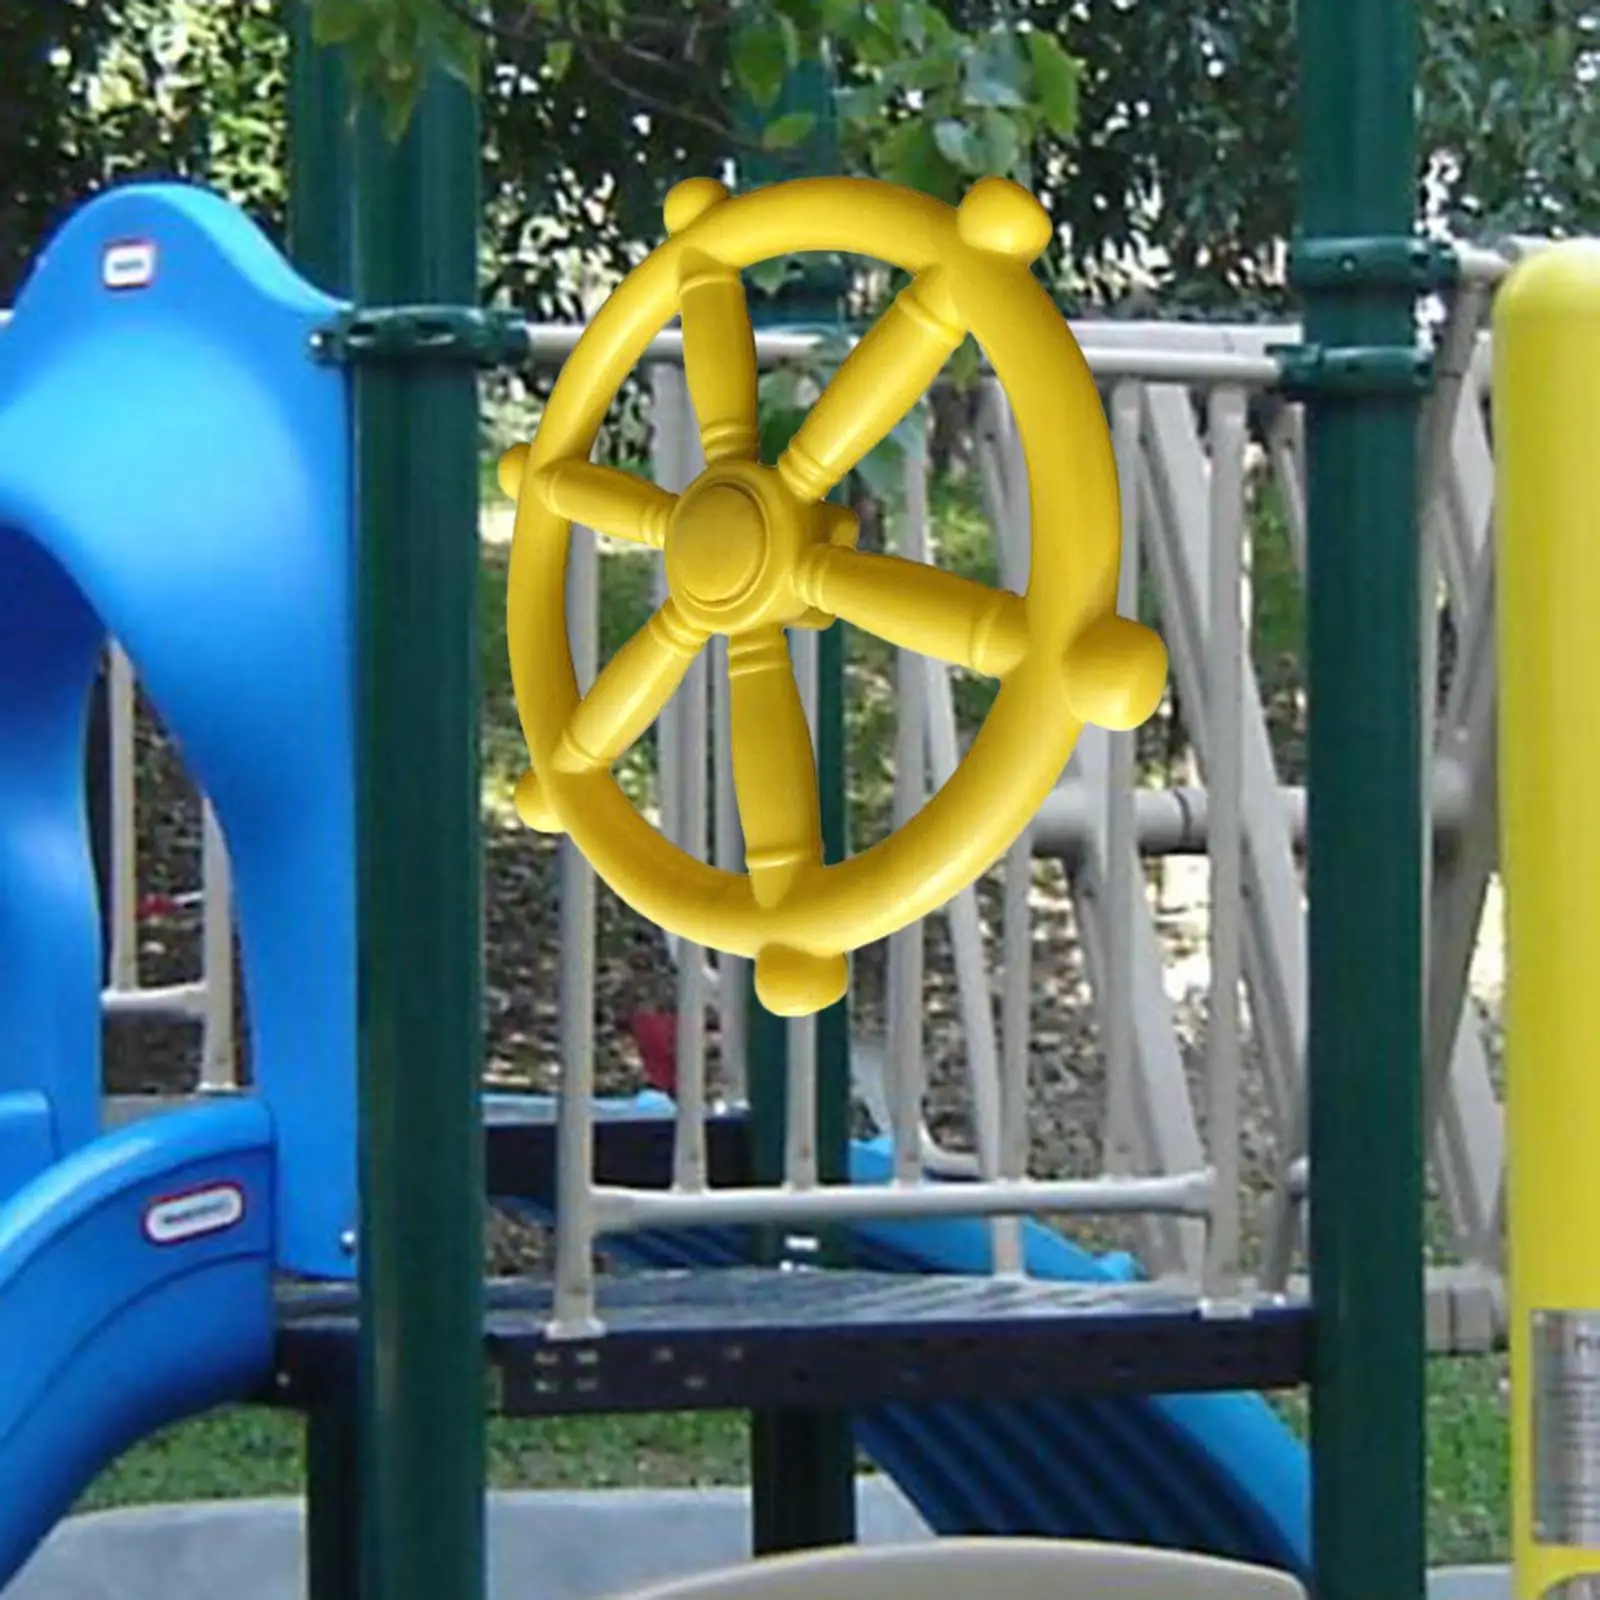 Pirate Ship Wheel Props Climb Playground Equipment for Park Outdoor Swingset